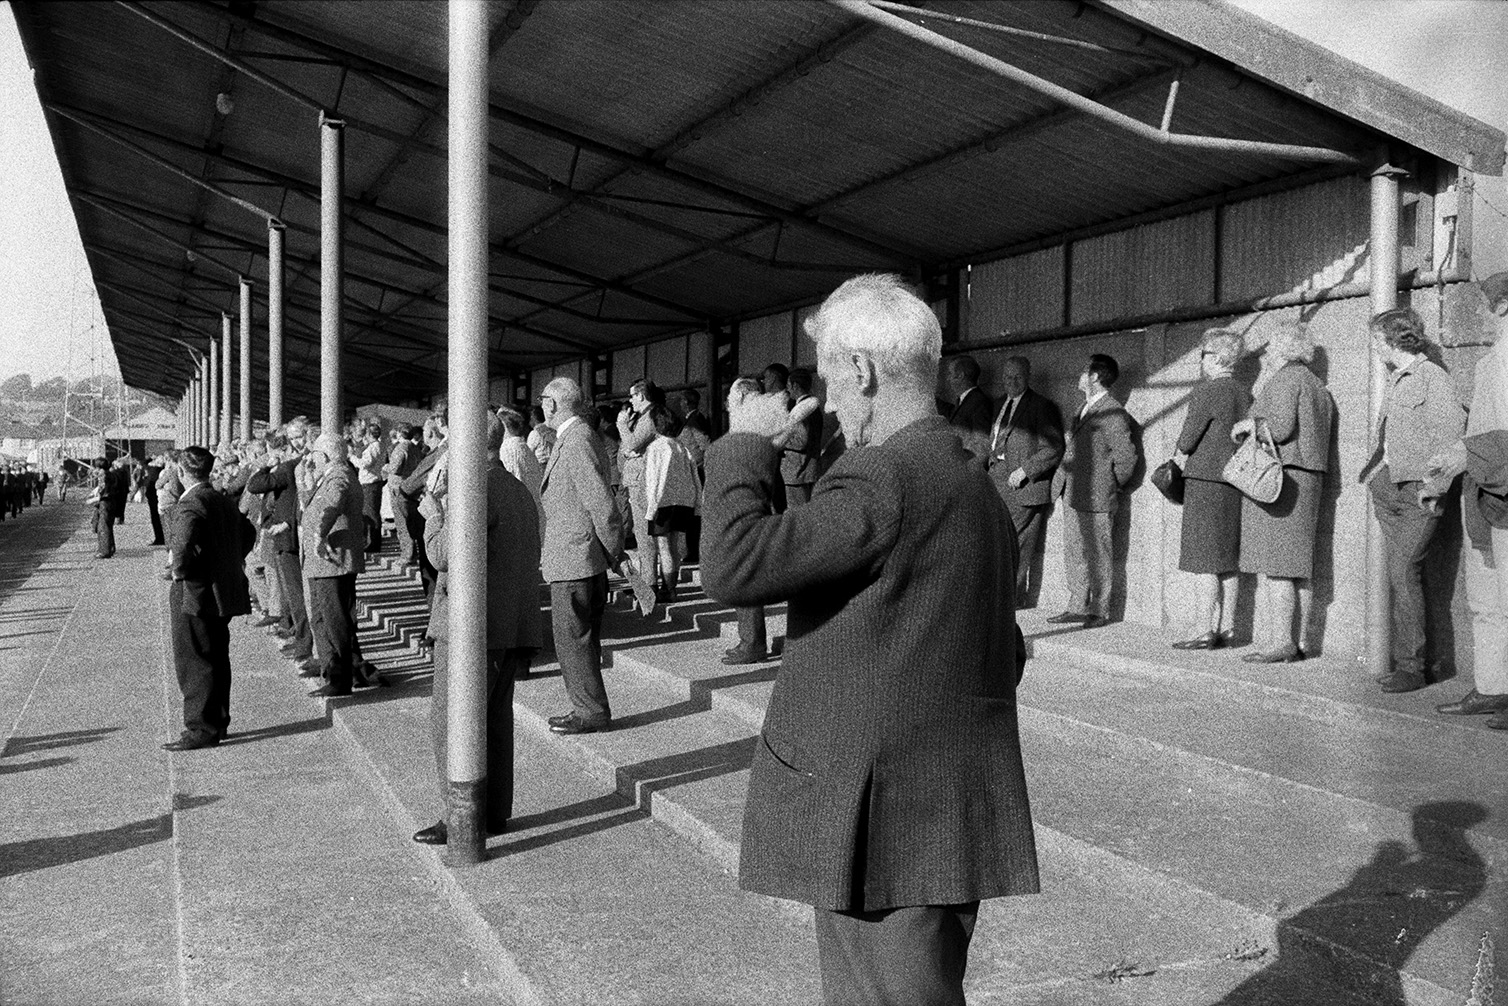 Men and women standing under a shelter and watching a parade or football match, possibly at Bideford.